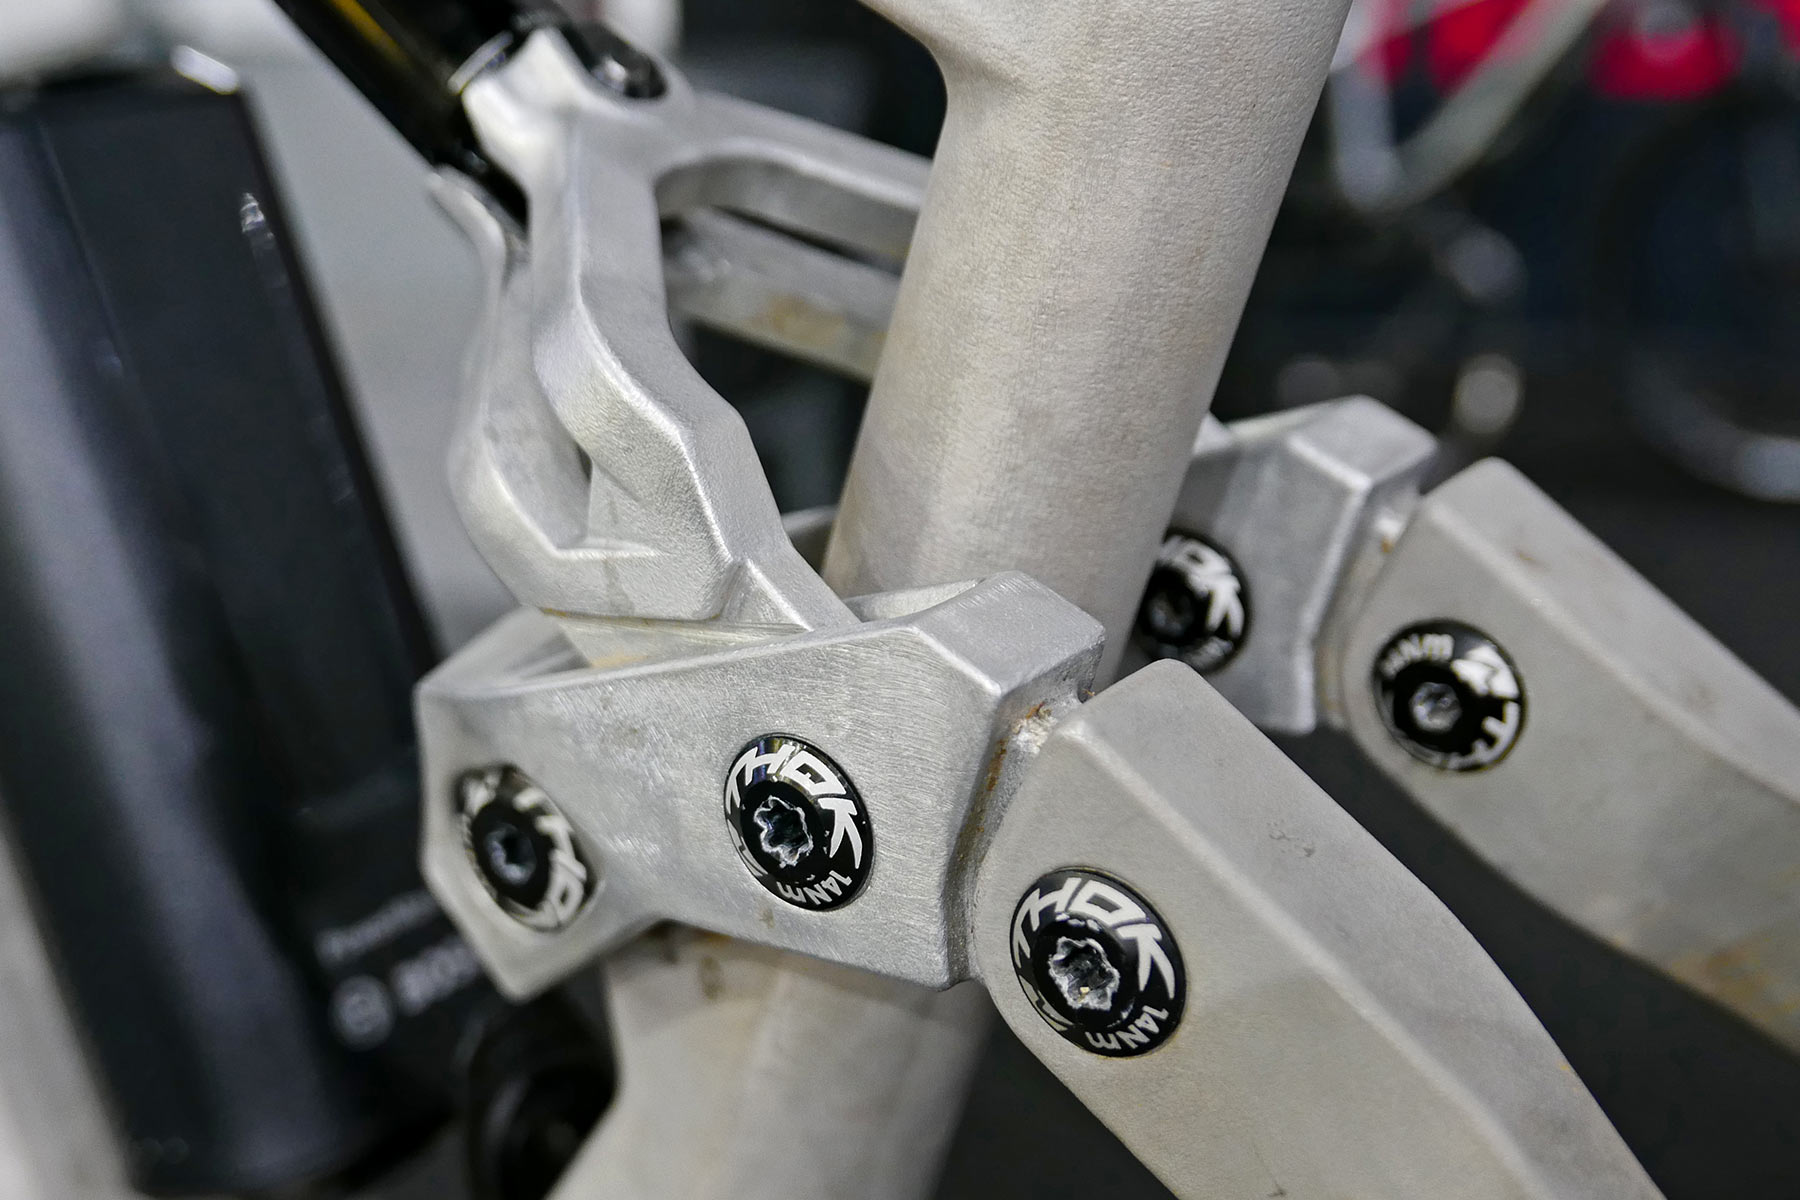 Thok Project 4 eMTB prototype, lightweight 3D-printed alloy all-mountain ebike, suspension linkage